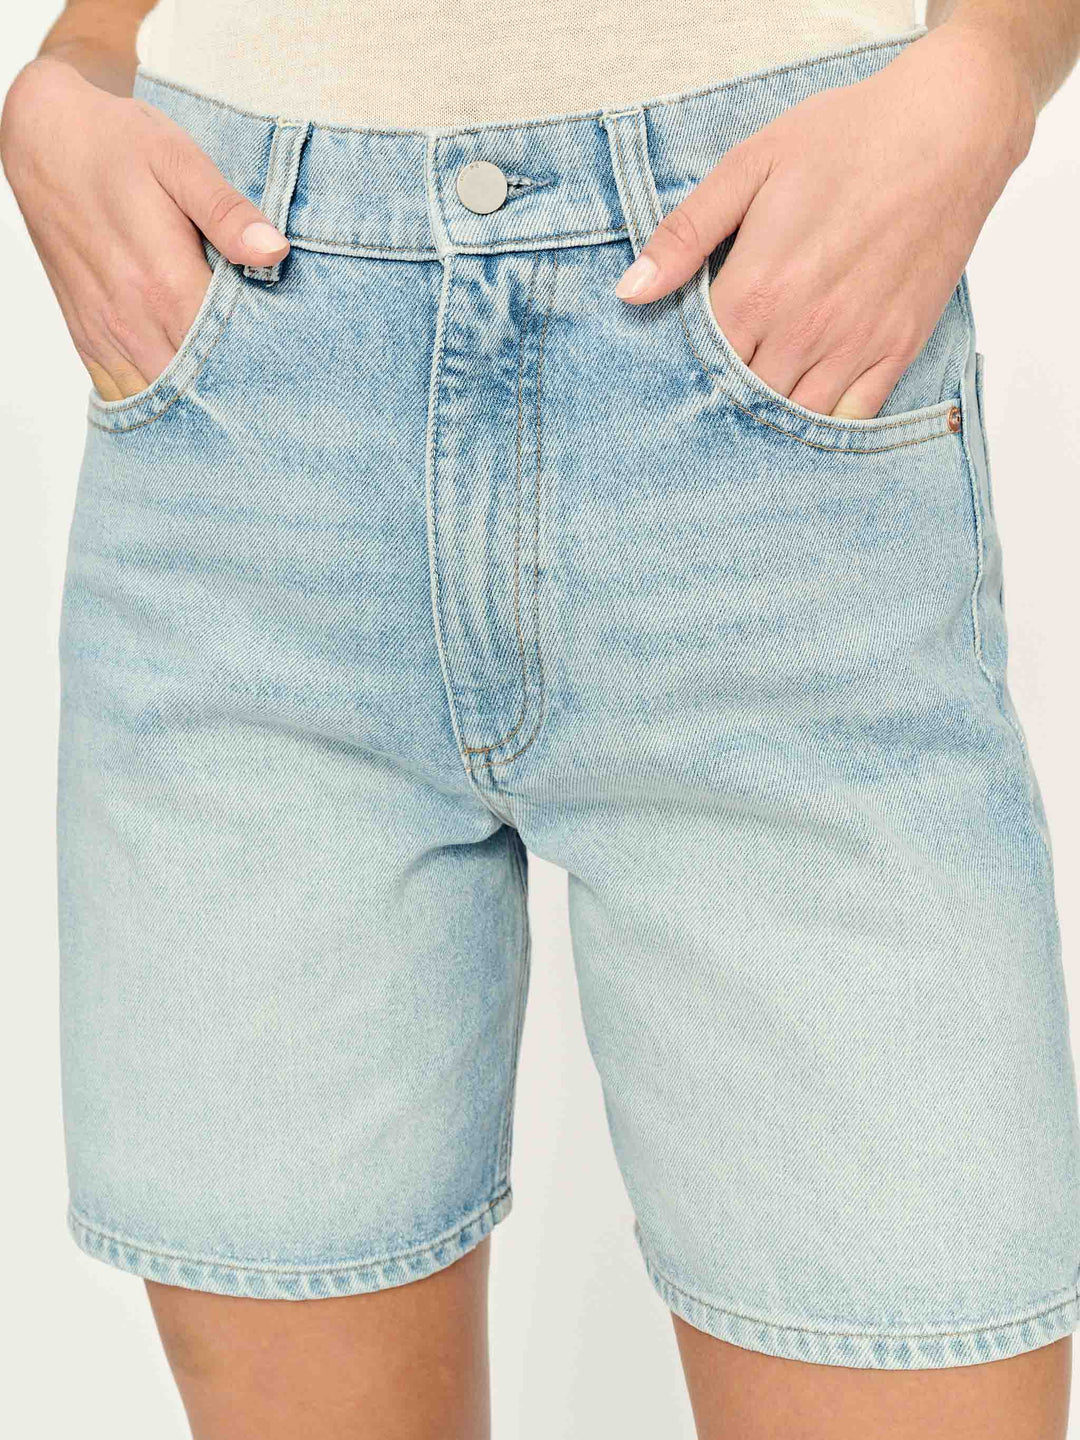 Taylor Ultra High Rise Jean Shorts in Vintage Light